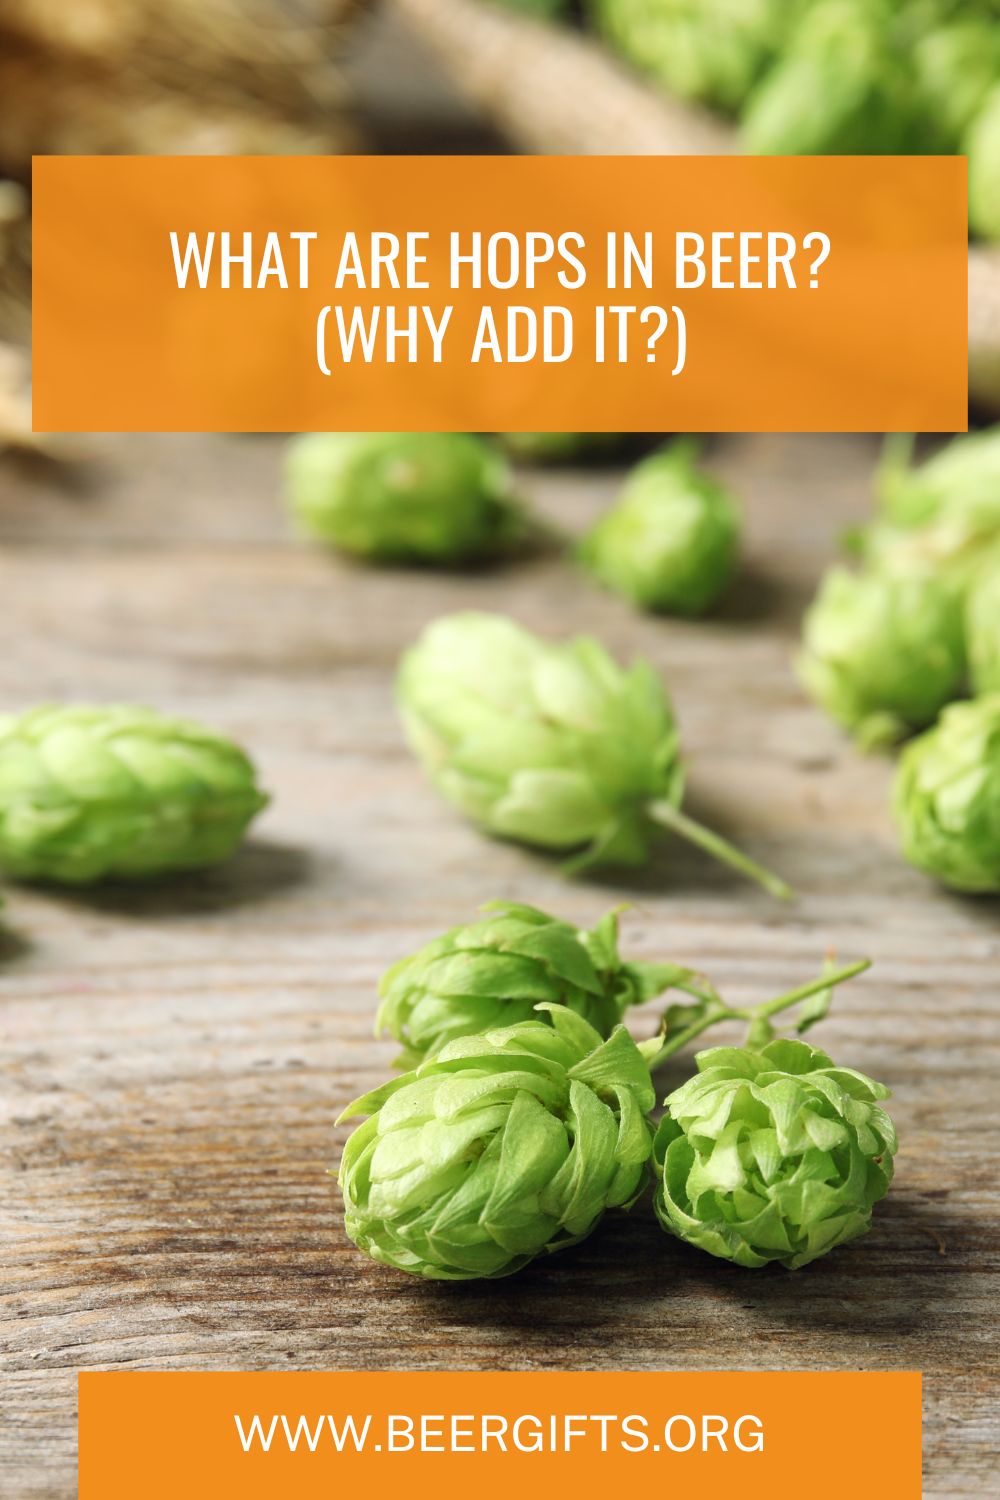 What Are Hops In Beer? (Why Add It?)8